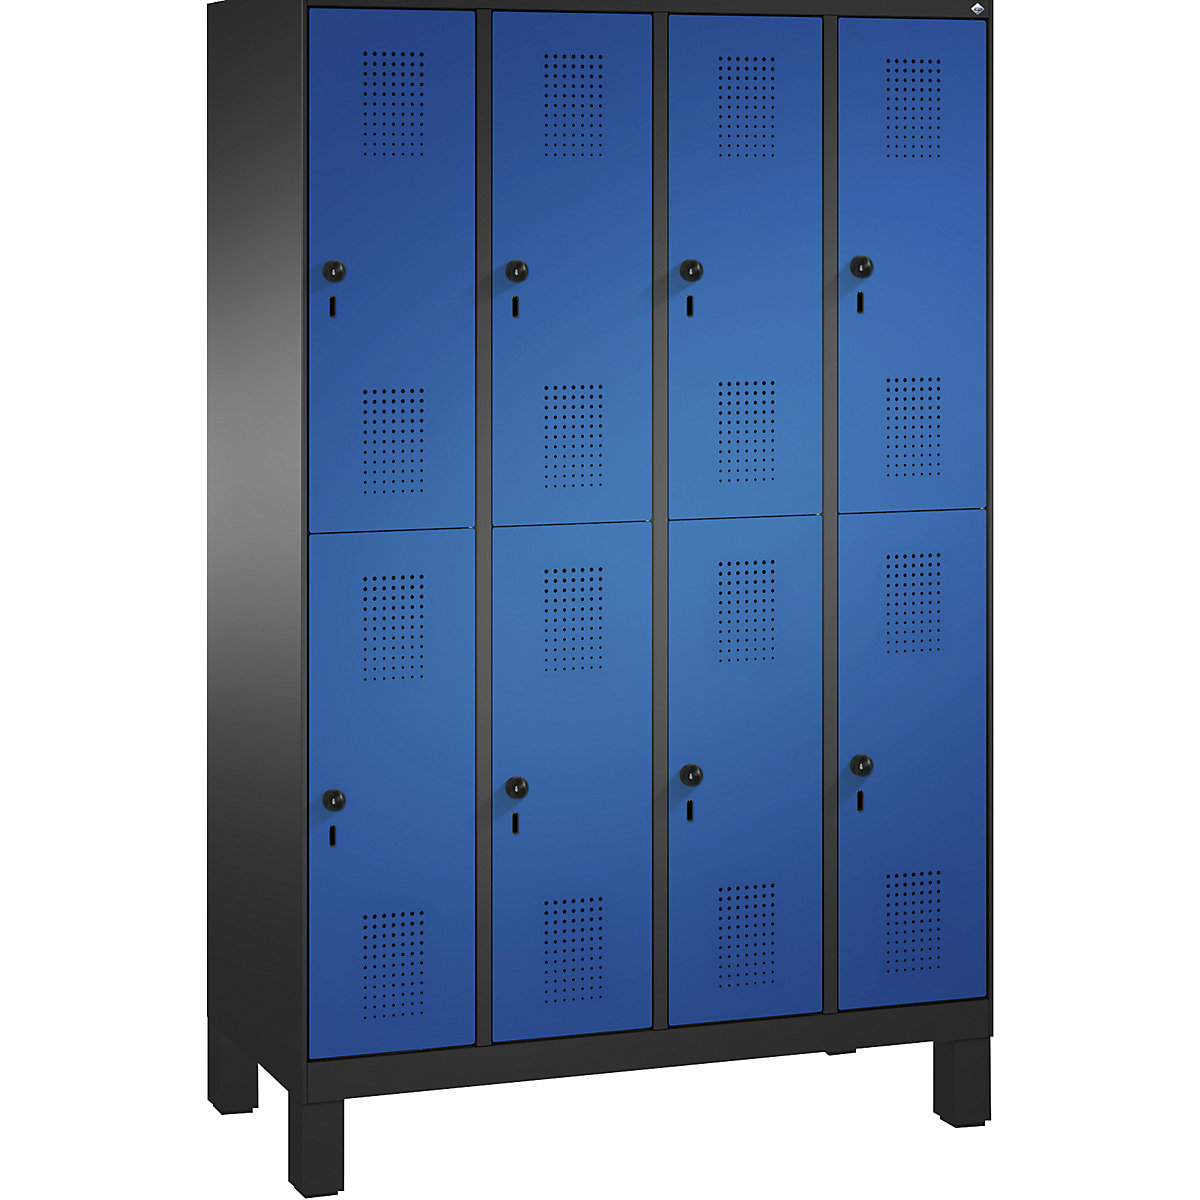 EVOLO cloakroom locker, double tier, with feet – C+P, 4 compartments, 2 shelf compartments each, compartment width 300 mm, black grey / gentian blue-16